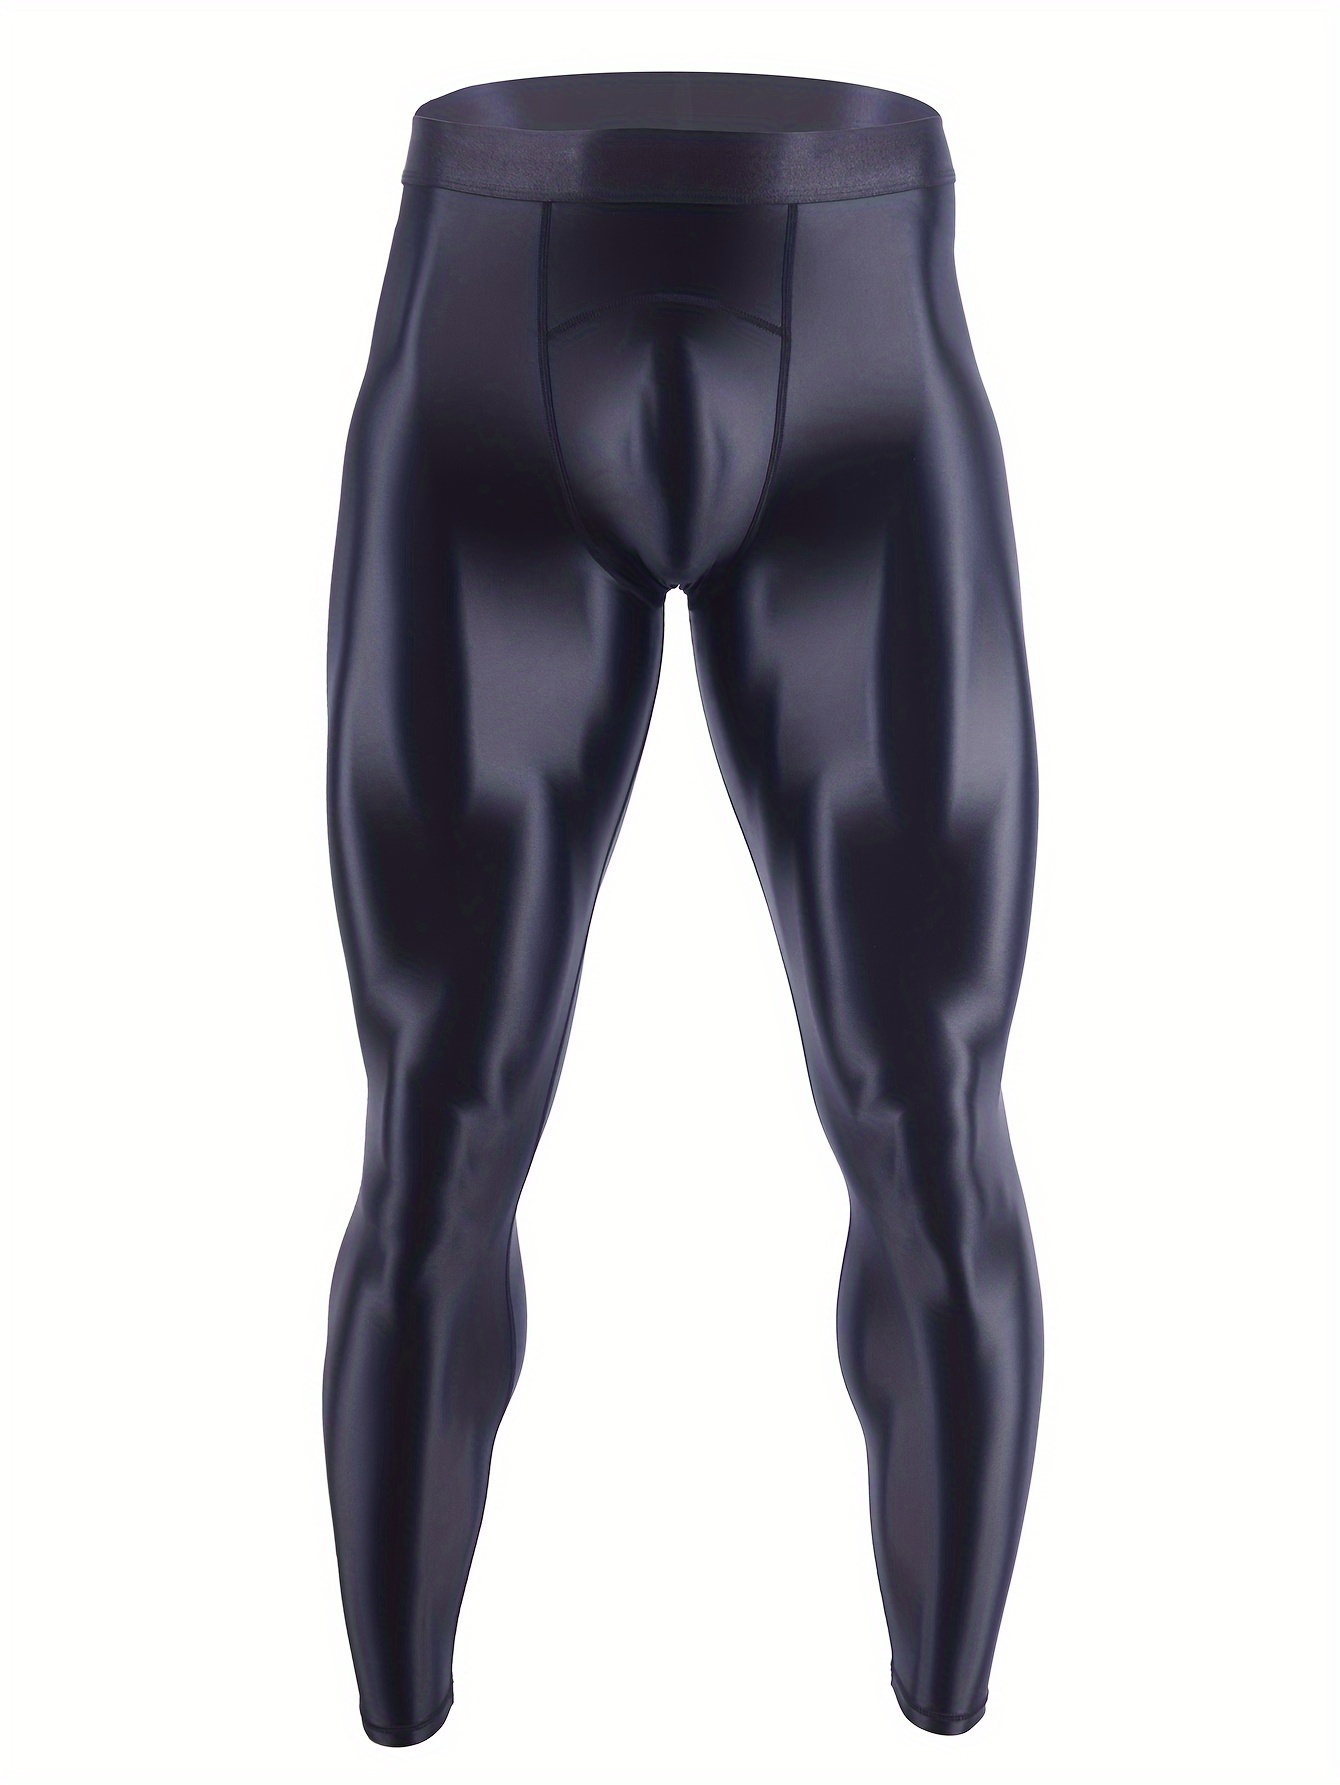 US Mens Oil Shiny Wet Look Long Tights Pants Athletic Trousers